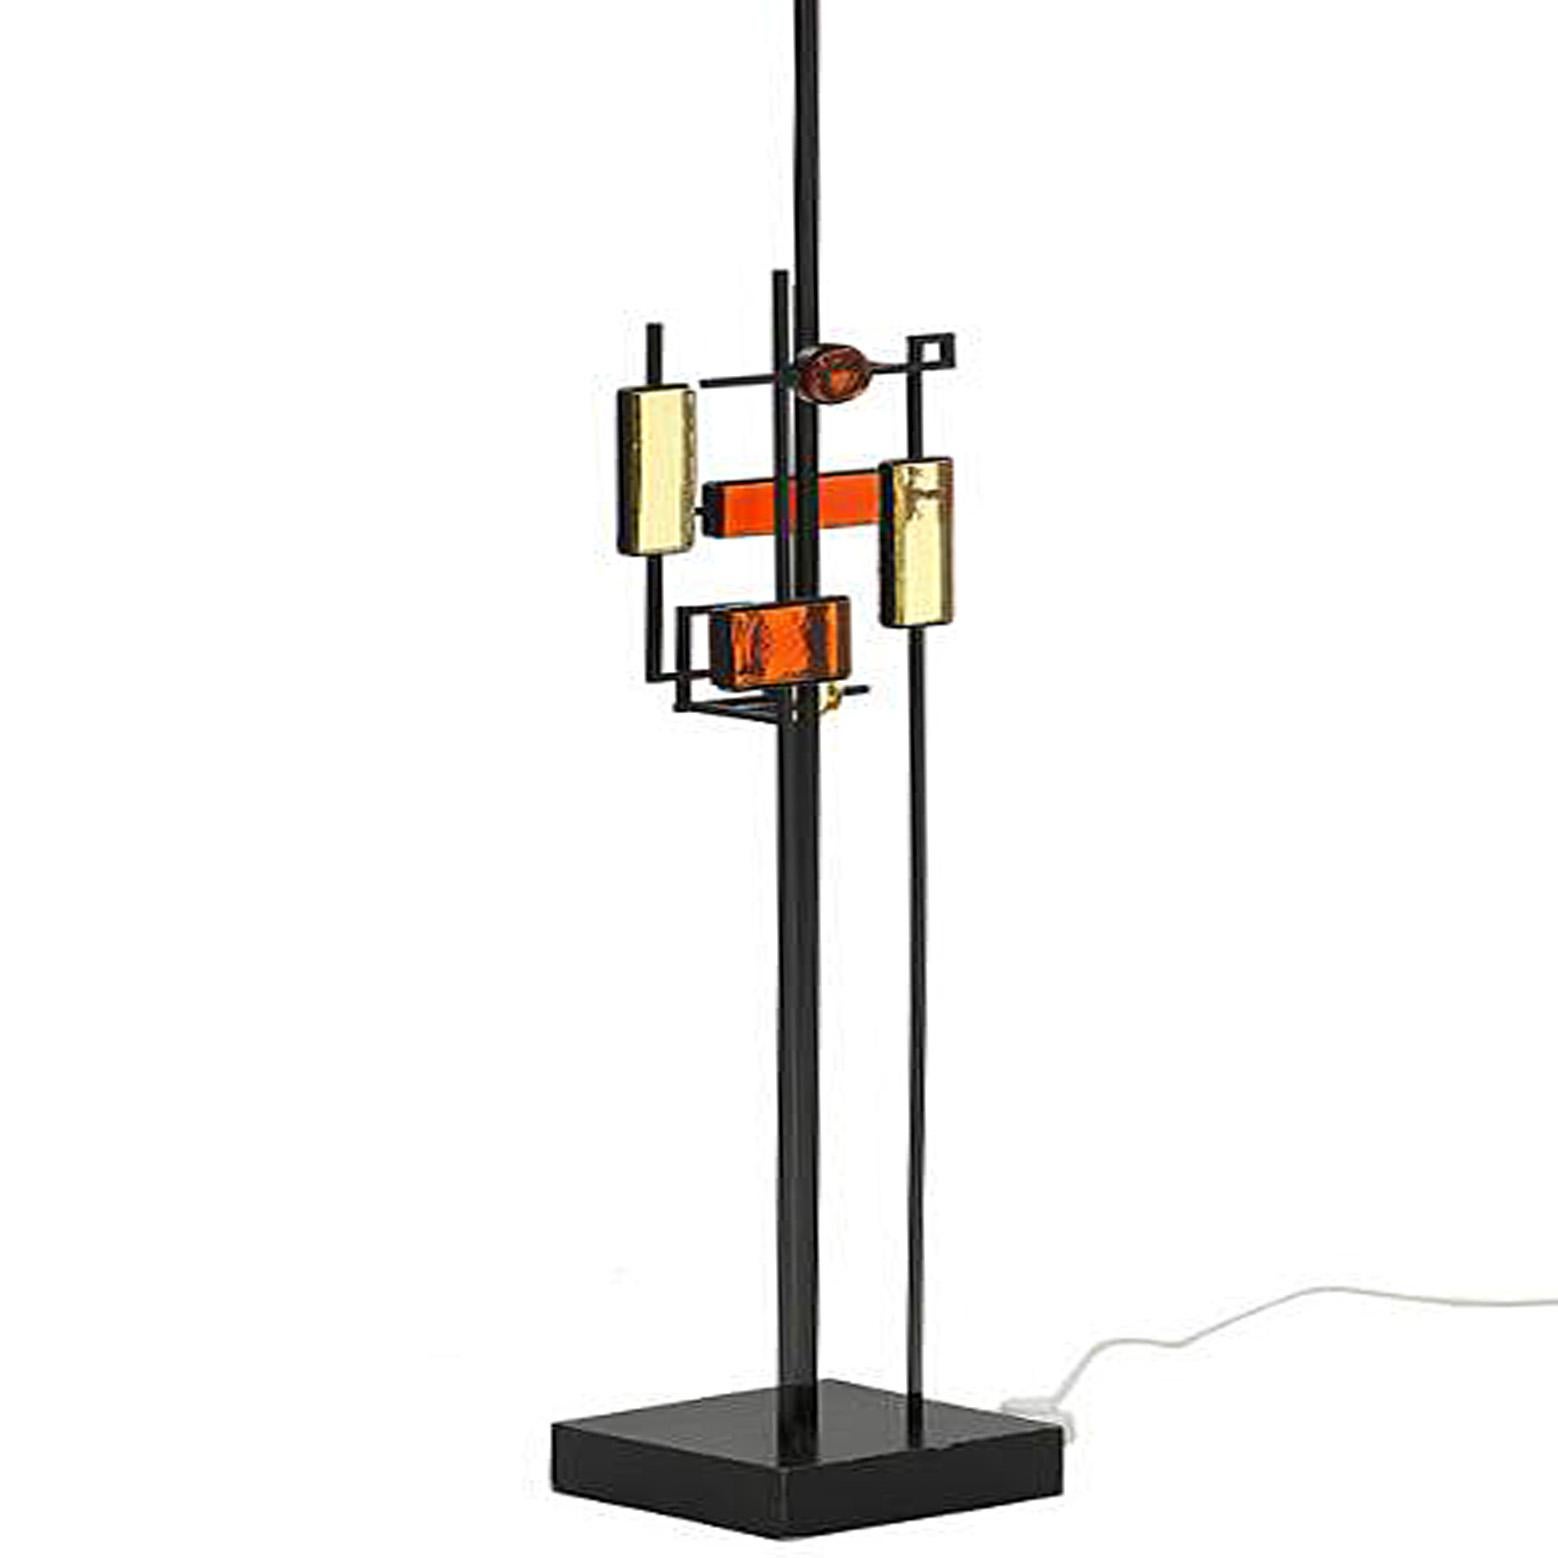 Floor lamp in metal and square art glass on a wood base, designed and made by Svend Aage Holm Sorensen original condition.